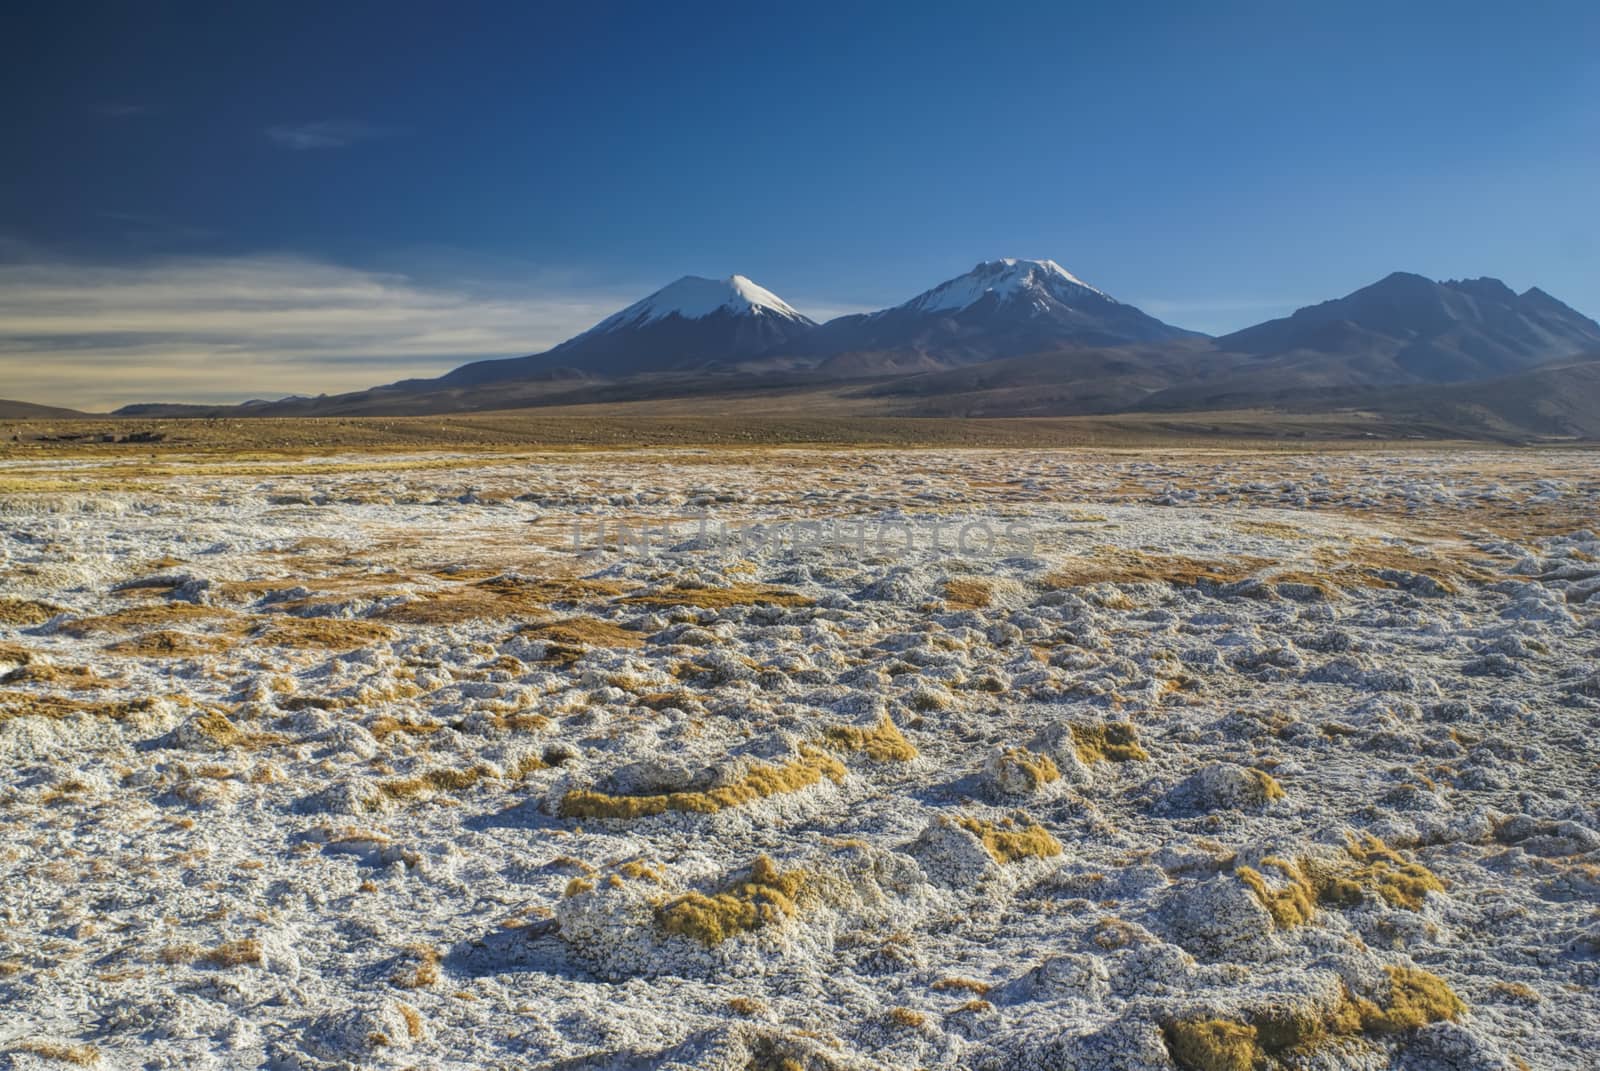 Picturesque view of bolivian volcanoes Pomerape and Paranicota, highest peaks in Sajama national park in Bolivia